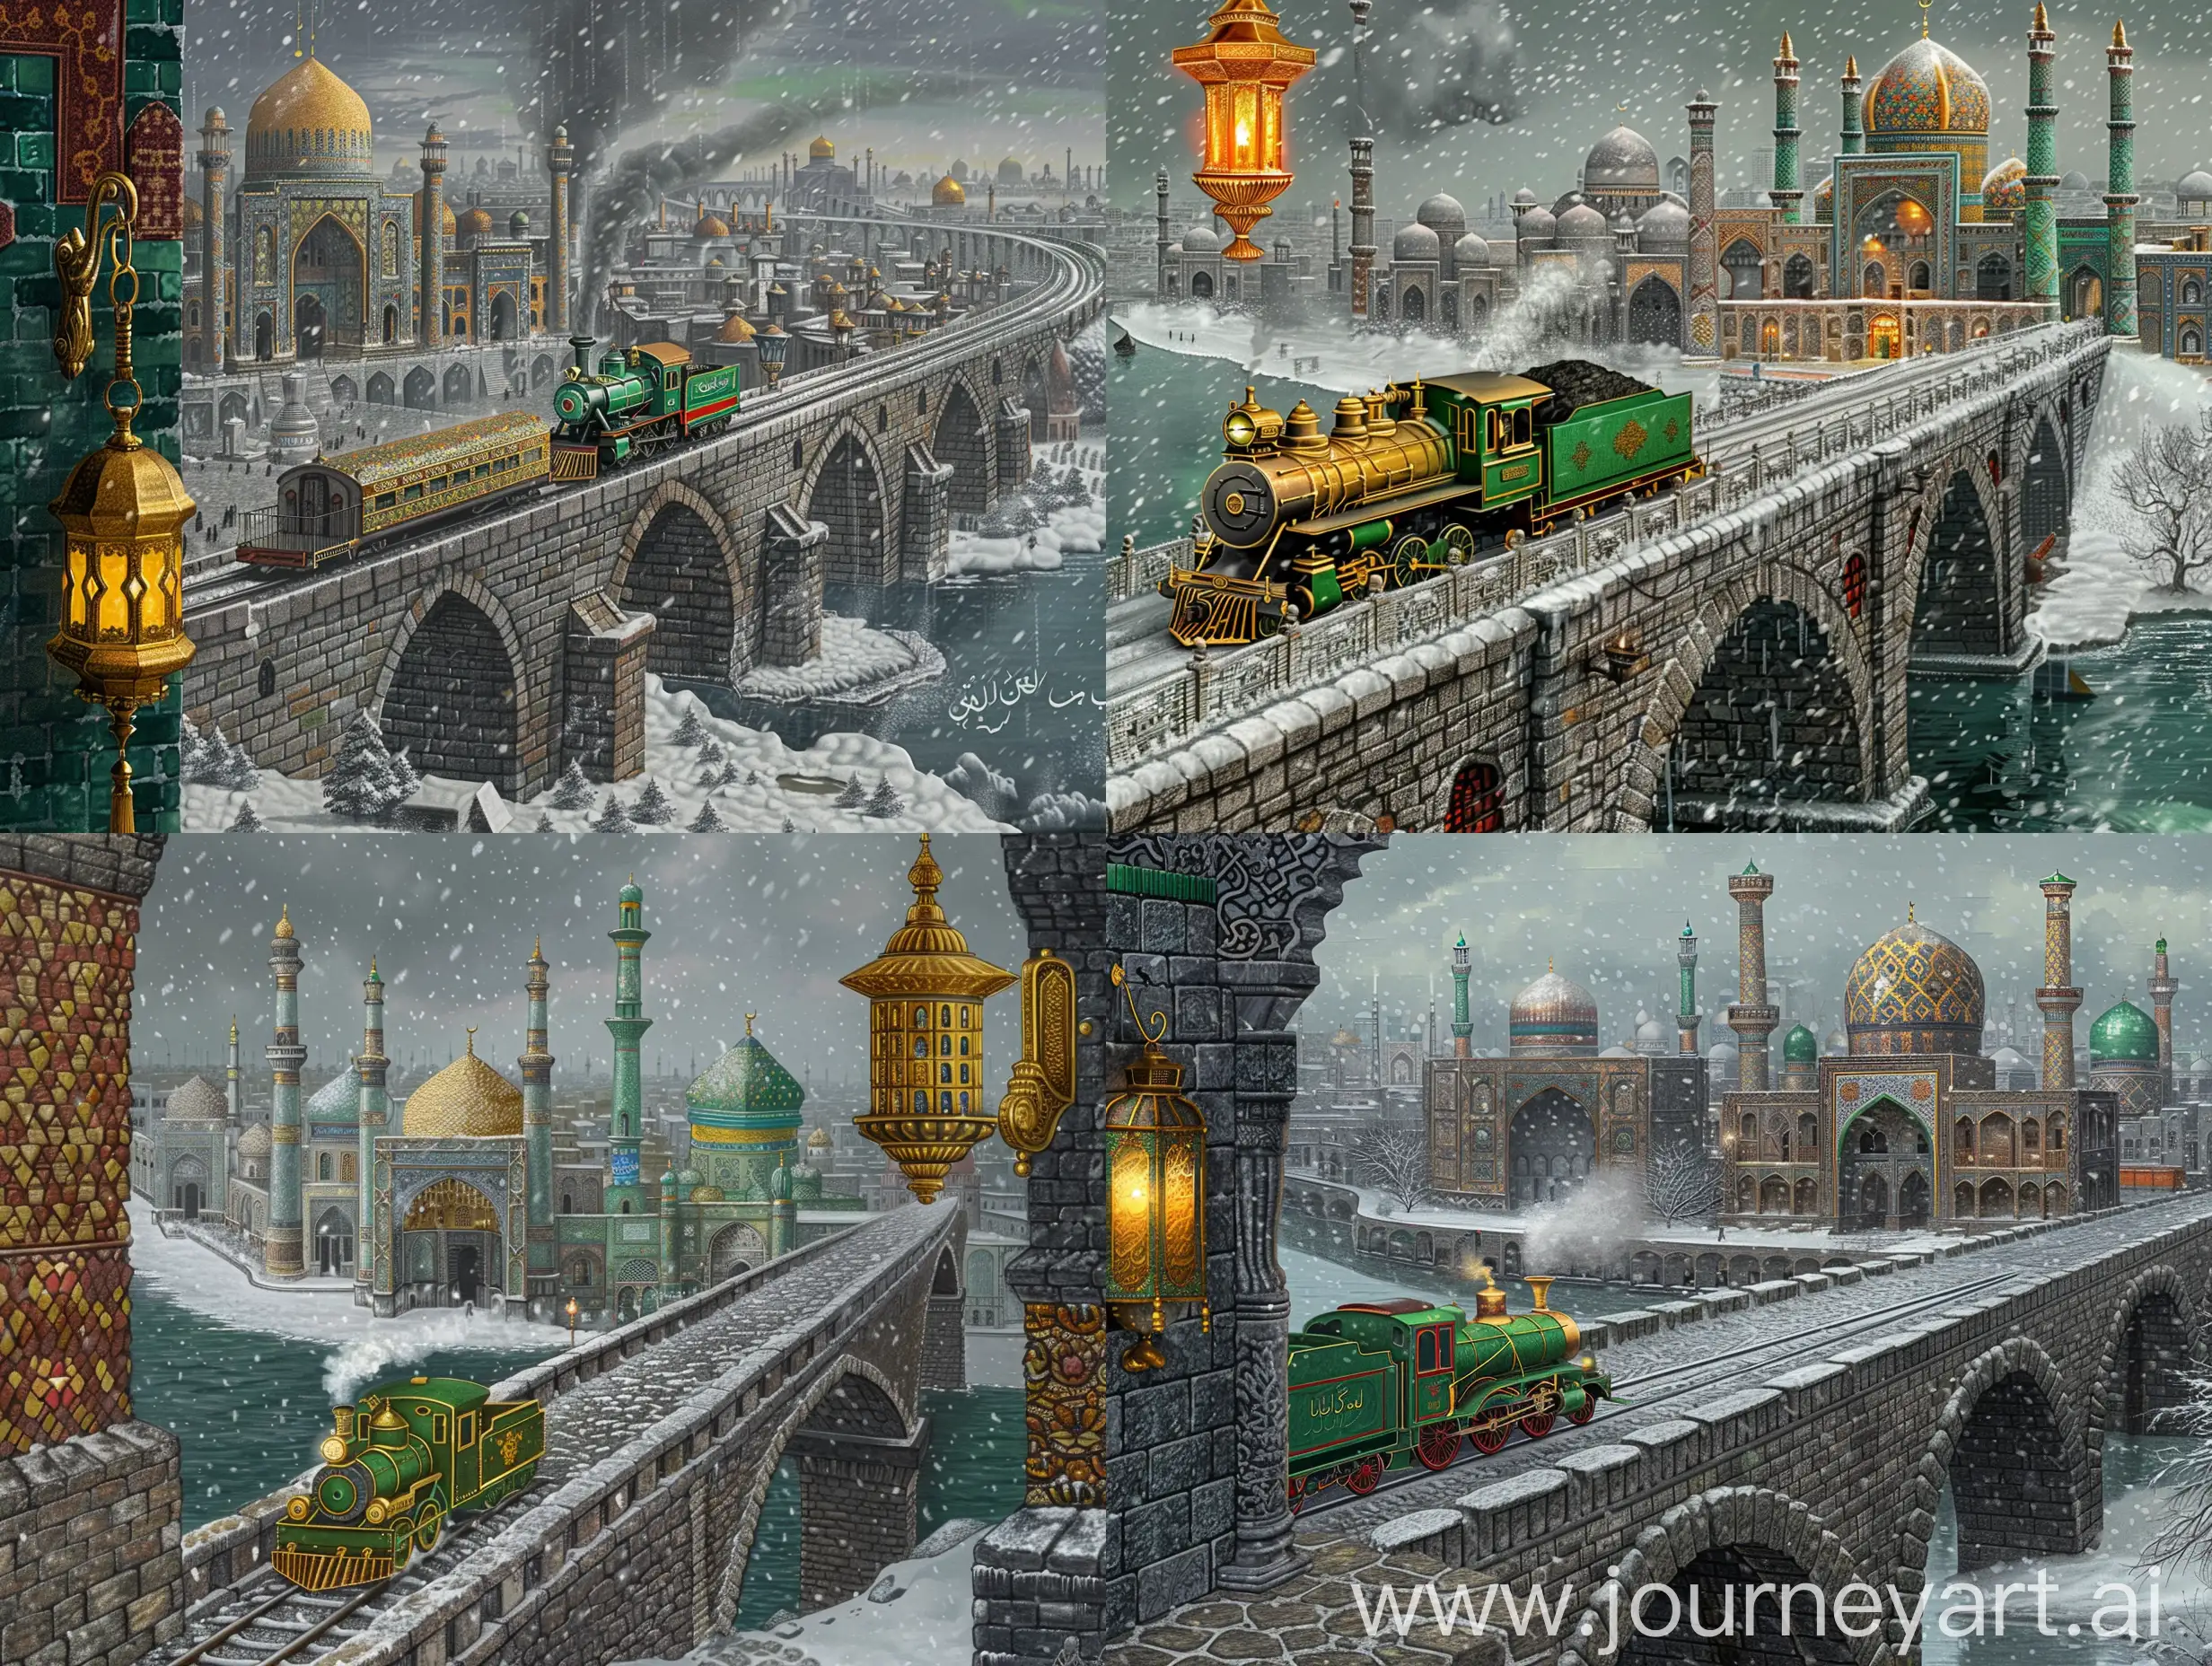 Persian miniature painting having Chinese painting influences with dazzling grey green red details of vibrant ancient chinese art: A stonebridge going towards into a seafront city, a green golden steam engine train moving on the bridge towards the middle of city, in the background is the wide seafront city full of Persian tiled Uzbekistan mosques and Isfahan mosque covered with persian tile exterior and gold ornaments, dark grey dramatic weather, snowfall, a glorious islamic lamp hanging on side of the image --ar 4:3